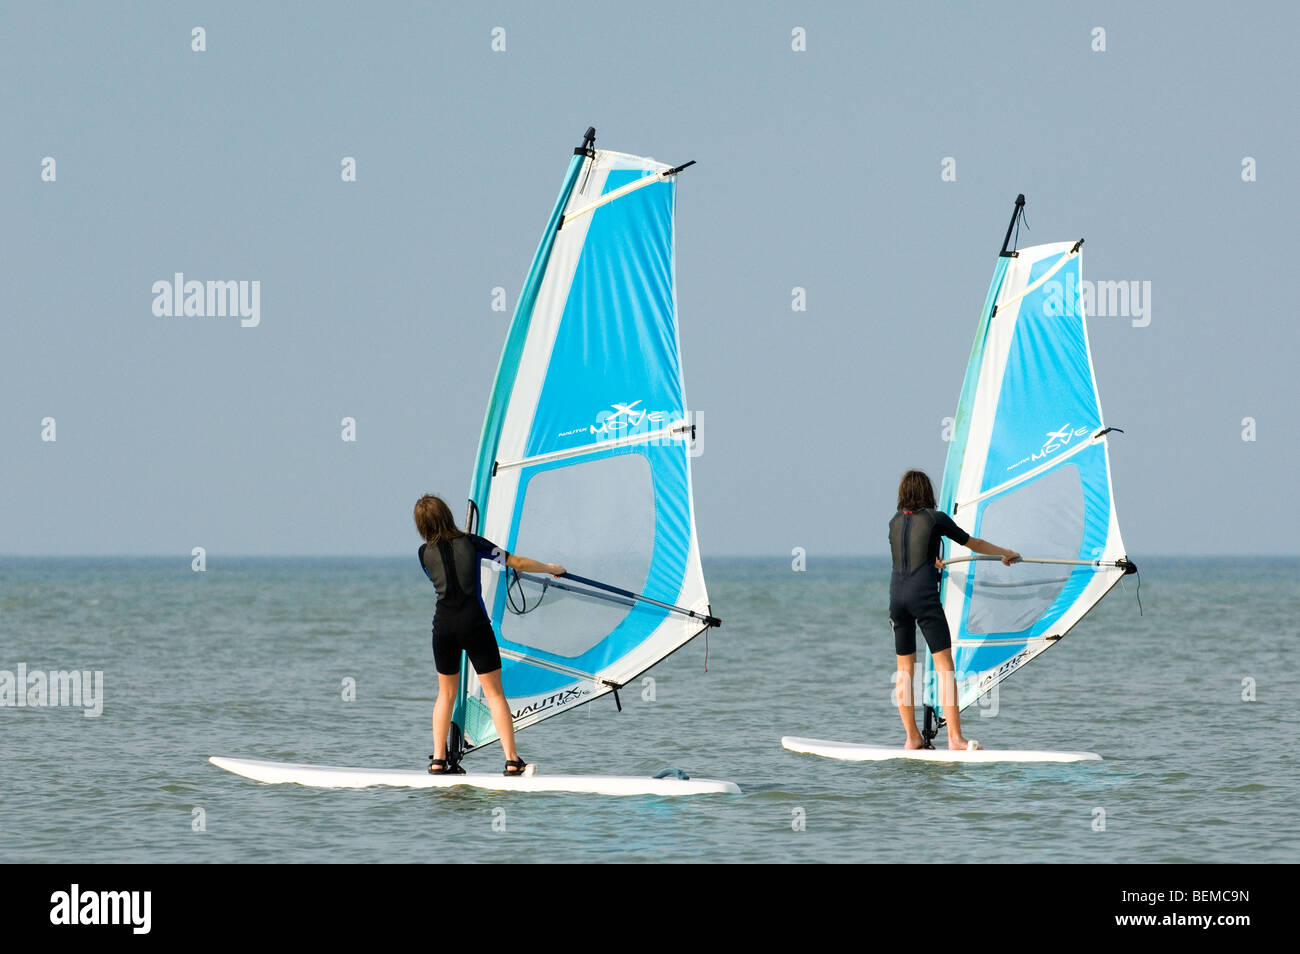 Two young girls windsurfing along the North Sea coast Stock Photo